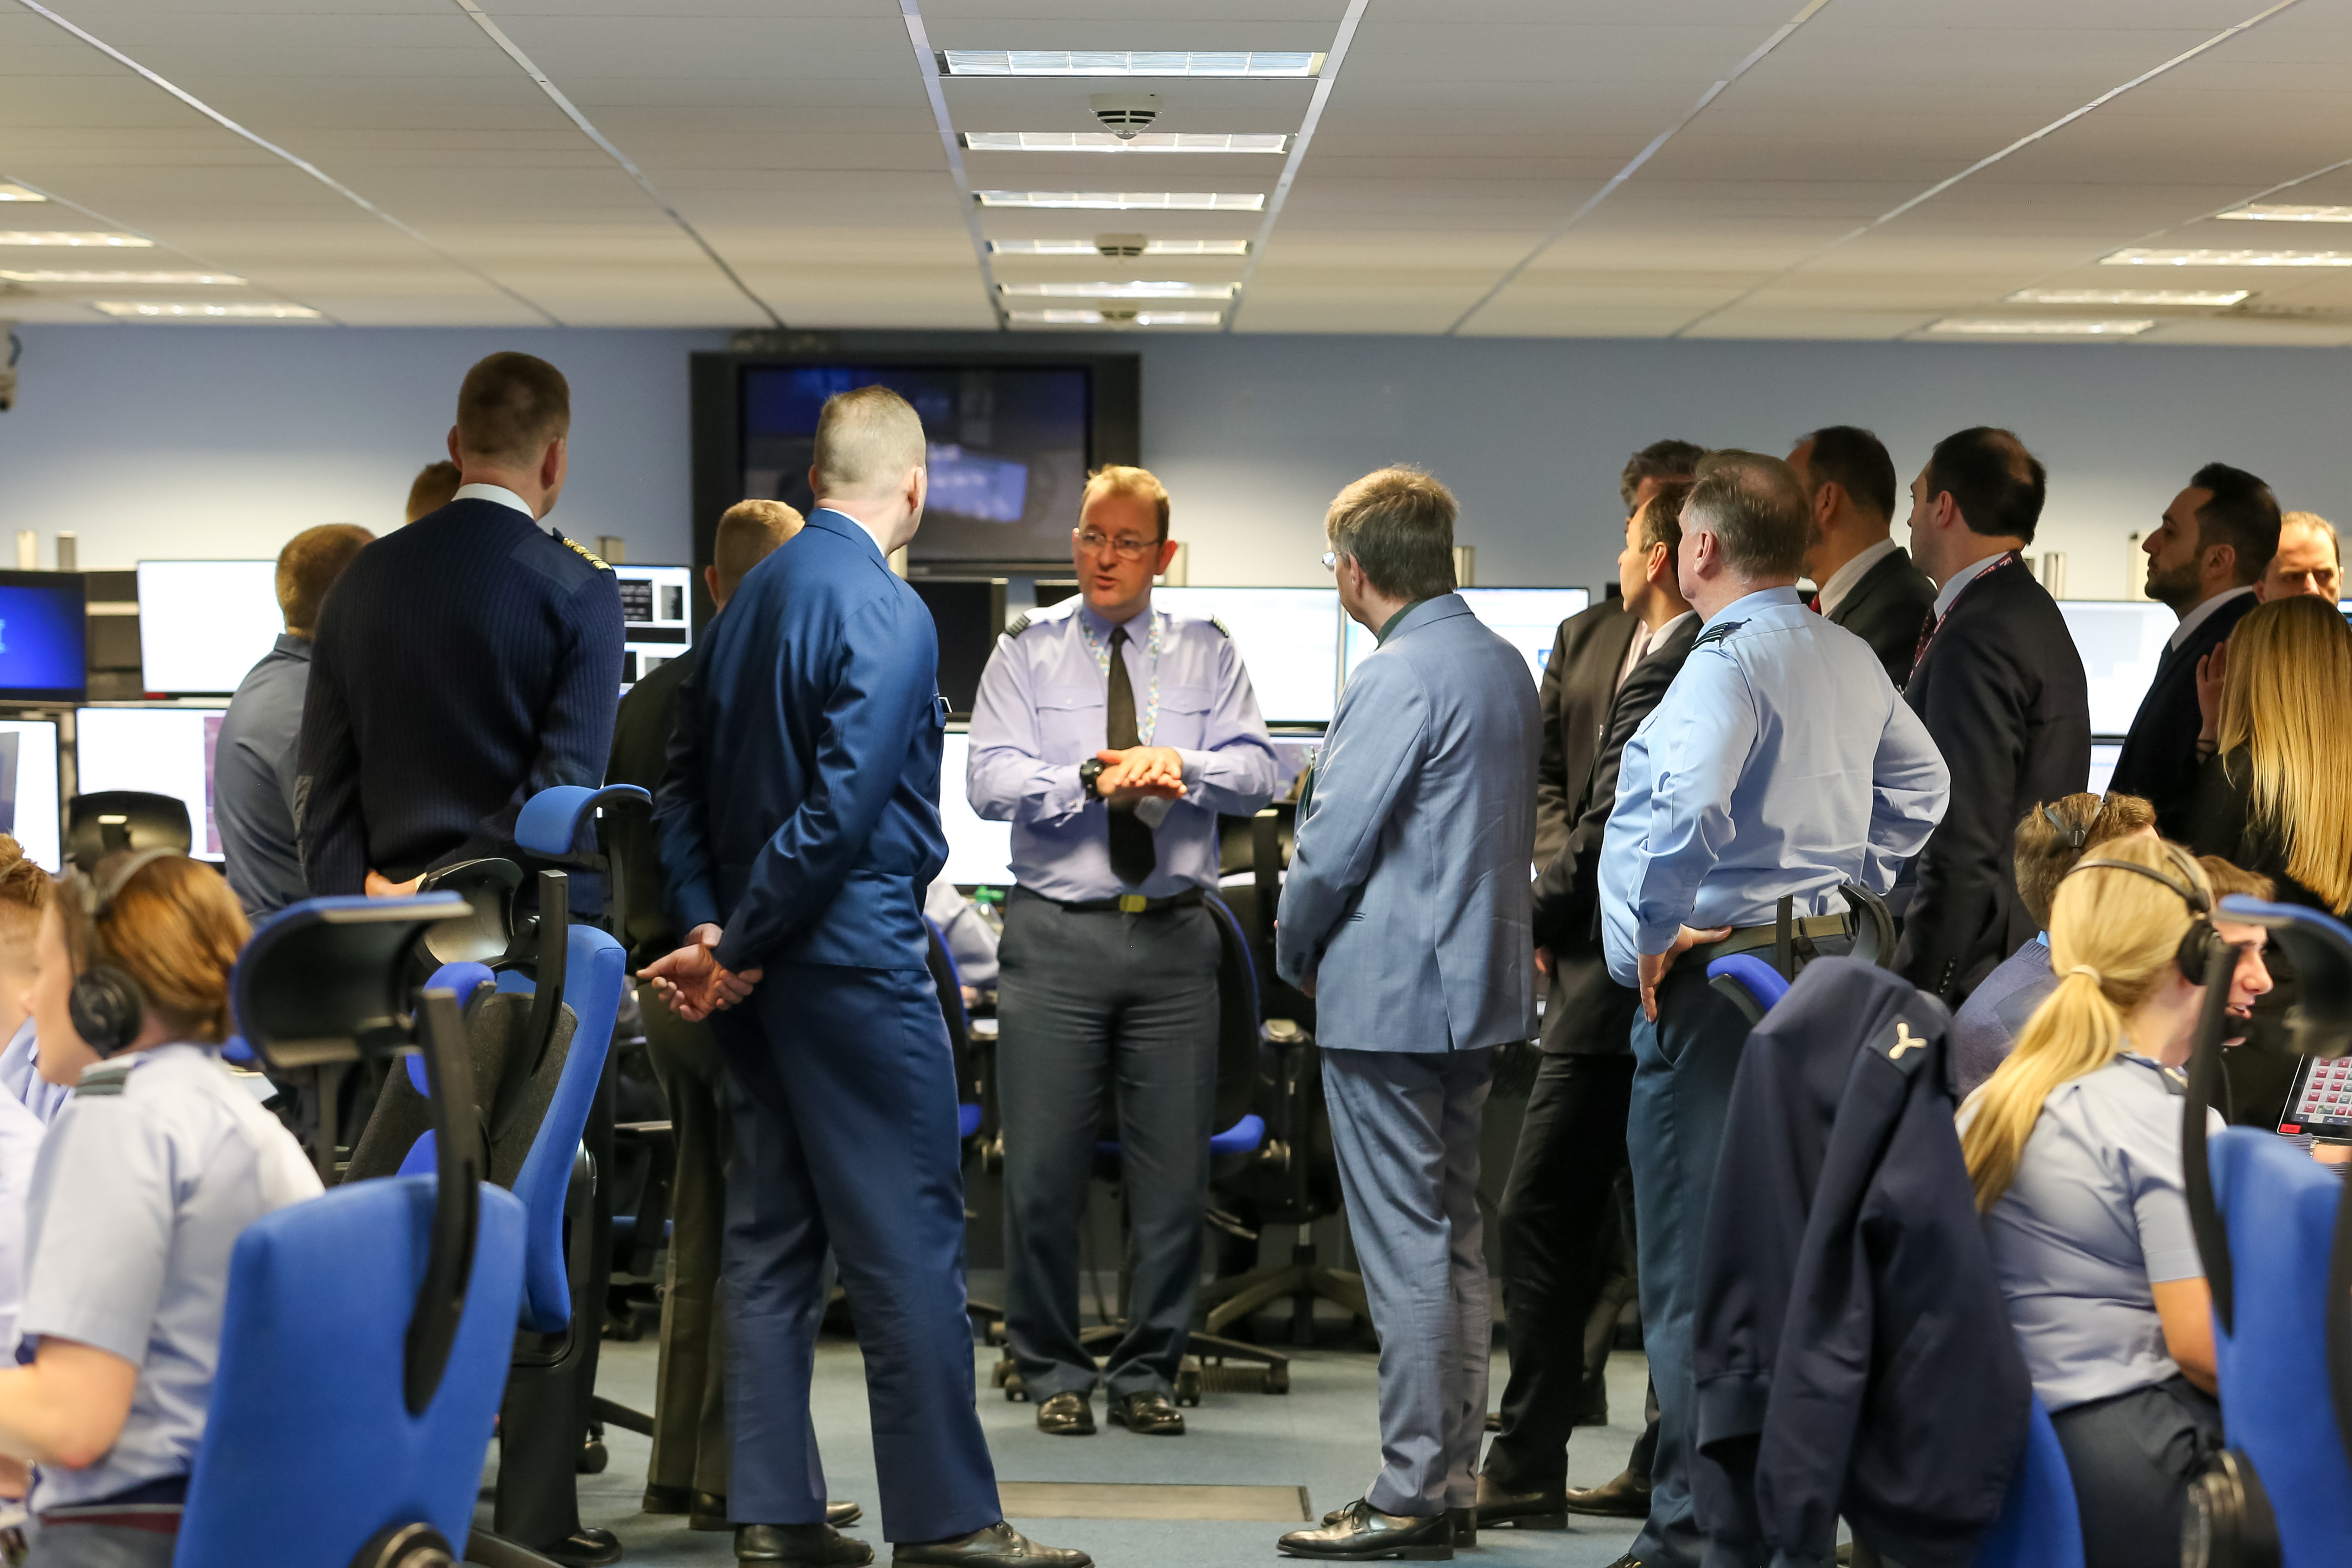 Image shows RAF aviators and civilians standing in discussion with some wearing headsets at desks.